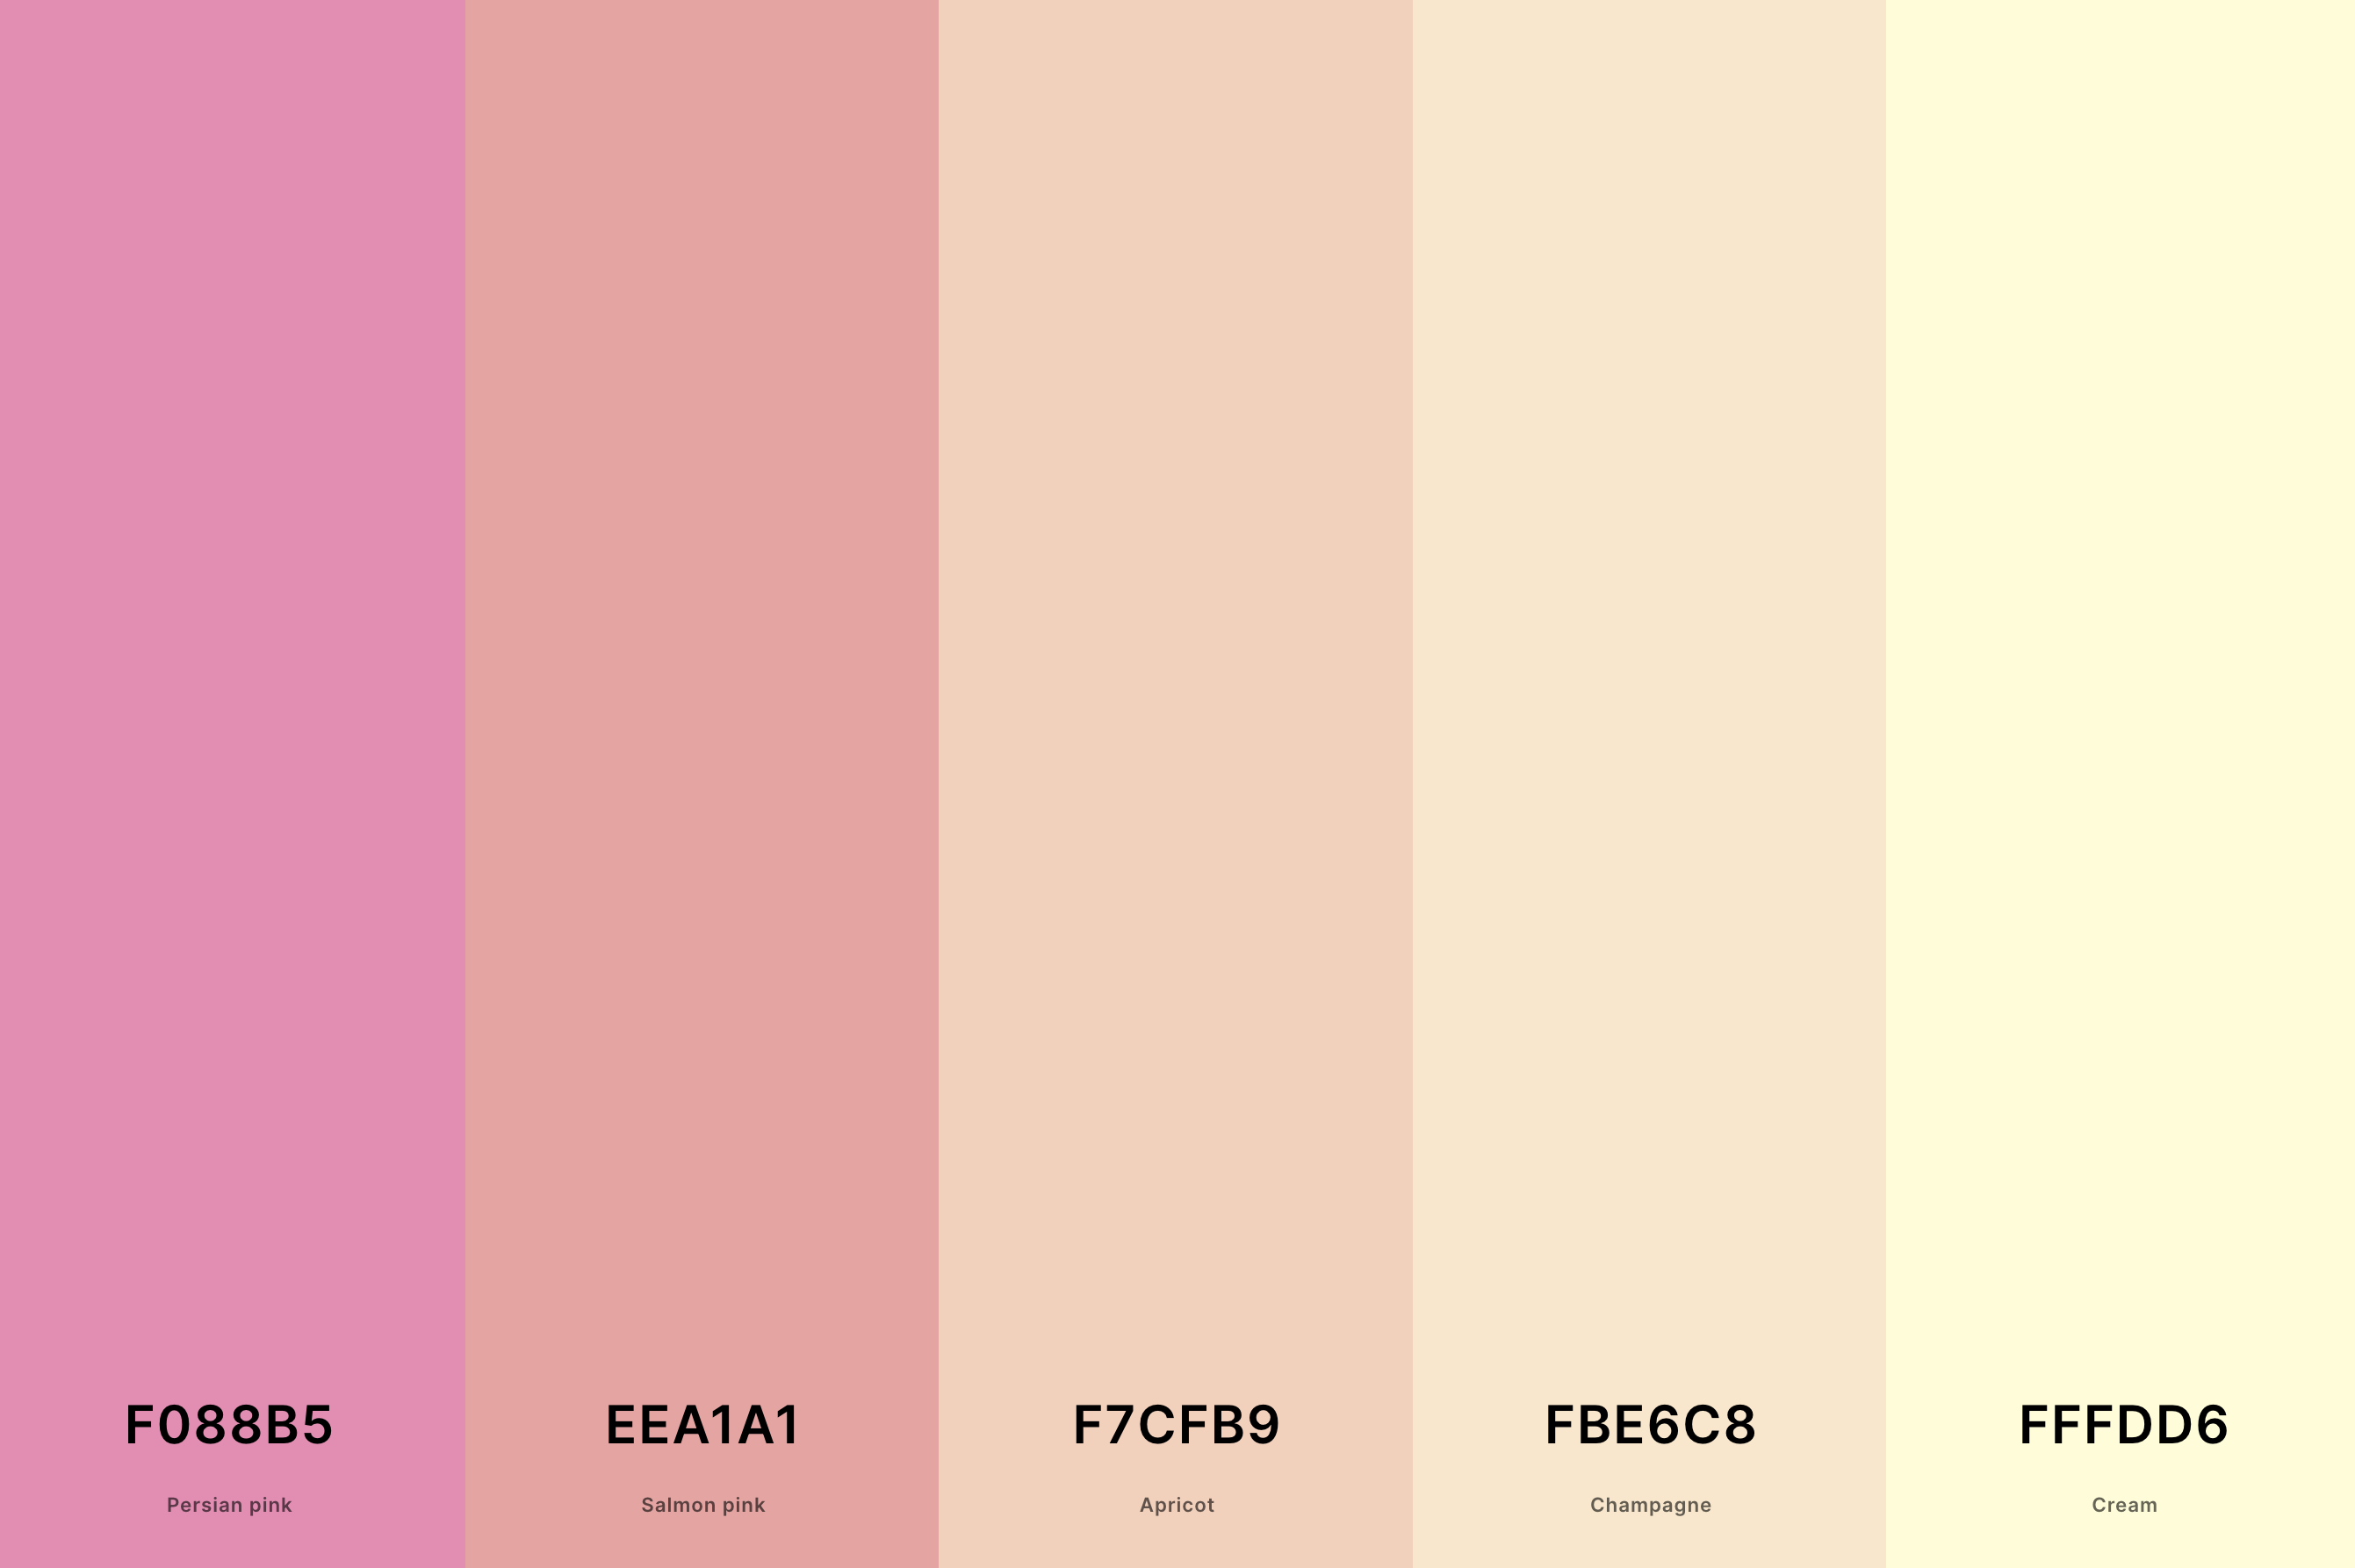 15. Cream And Pink Color Palette Color Palette with Persian Pink (Hex #F088B5) + Salmon Pink (Hex #EEA1A1) + Apricot (Hex #F7CFB9) + Champagne (Hex #FBE6C8) + Cream (Hex #FFFDD6) Color Palette with Hex Codes